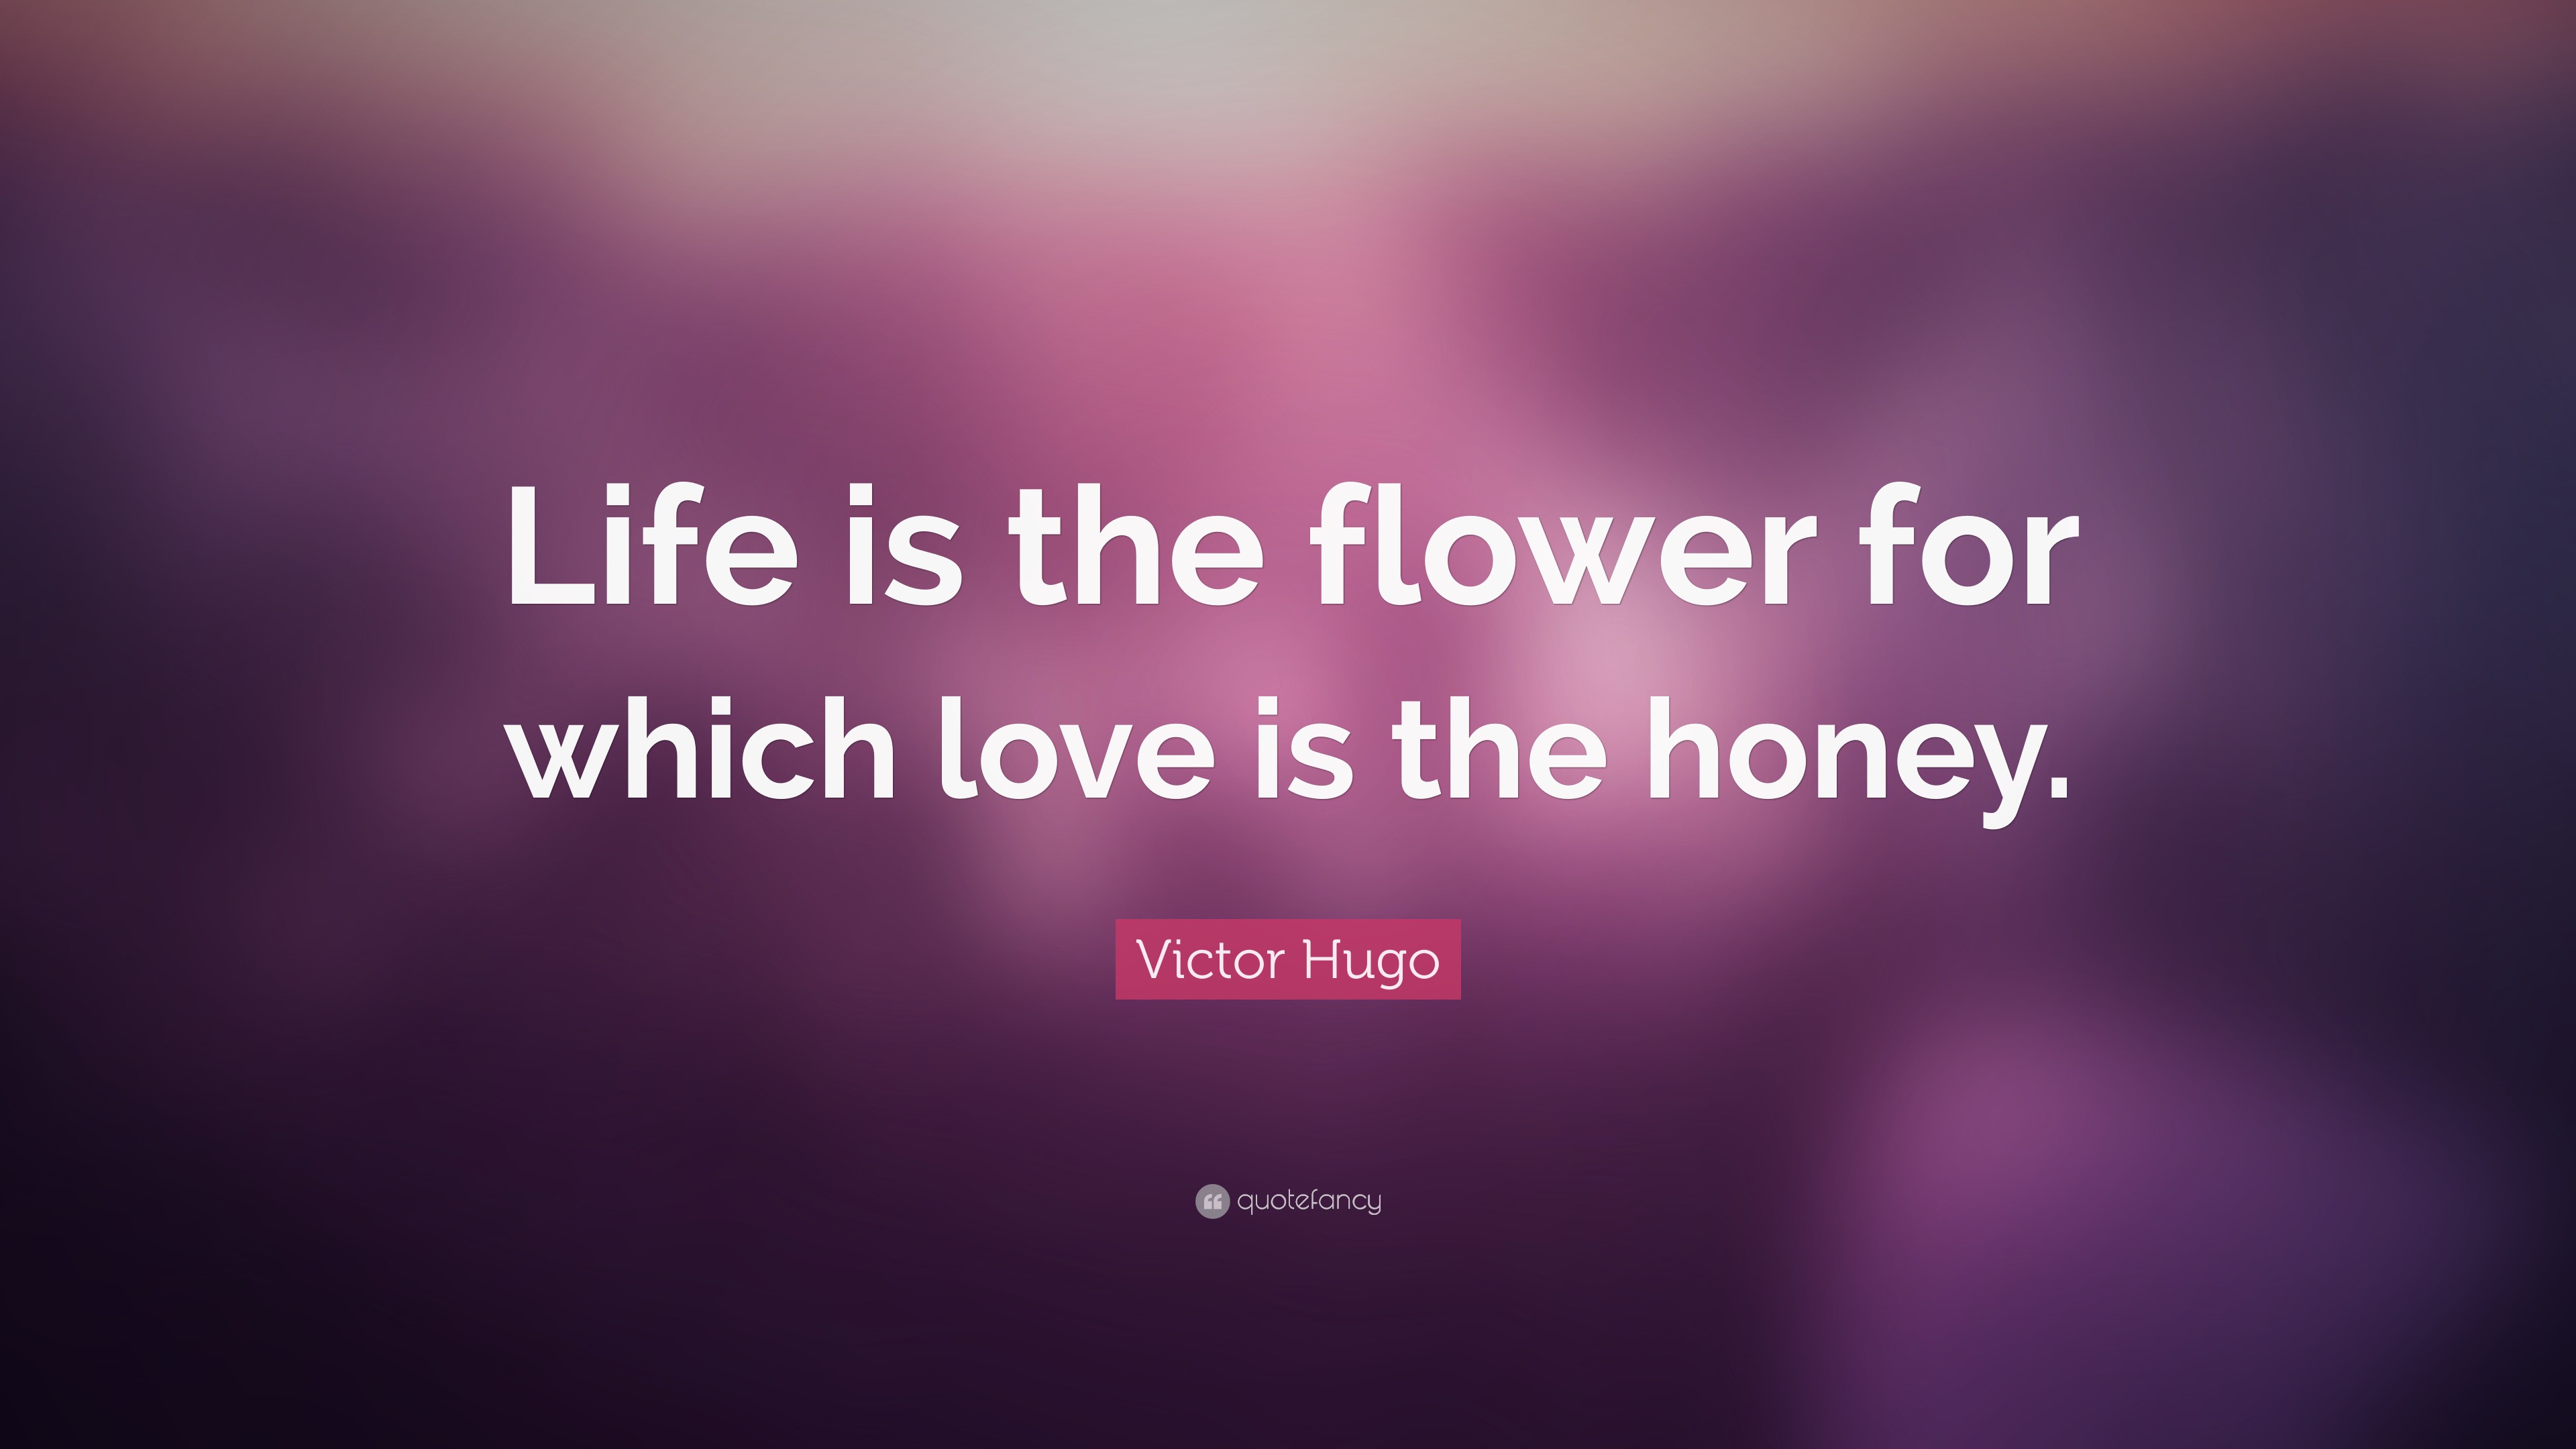 Victor Hugo Quote Life Is The Flower For Which Love Is The Honey